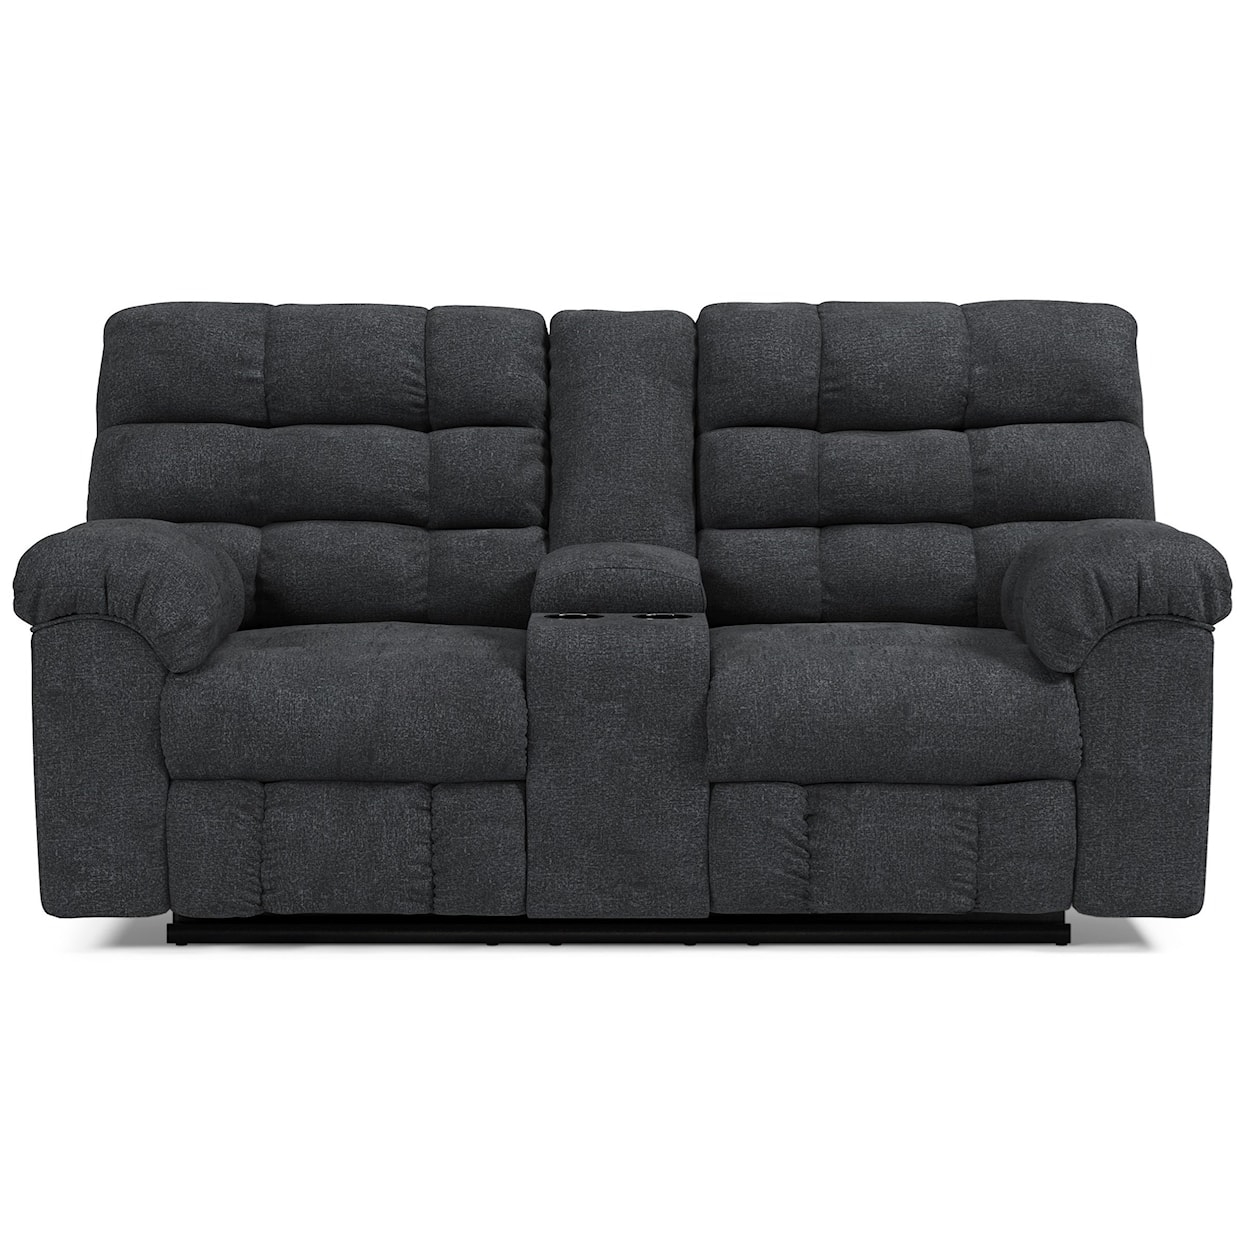 Signature Design by Ashley Furniture Wilhurst Double Reclining Loveseat w/ Console